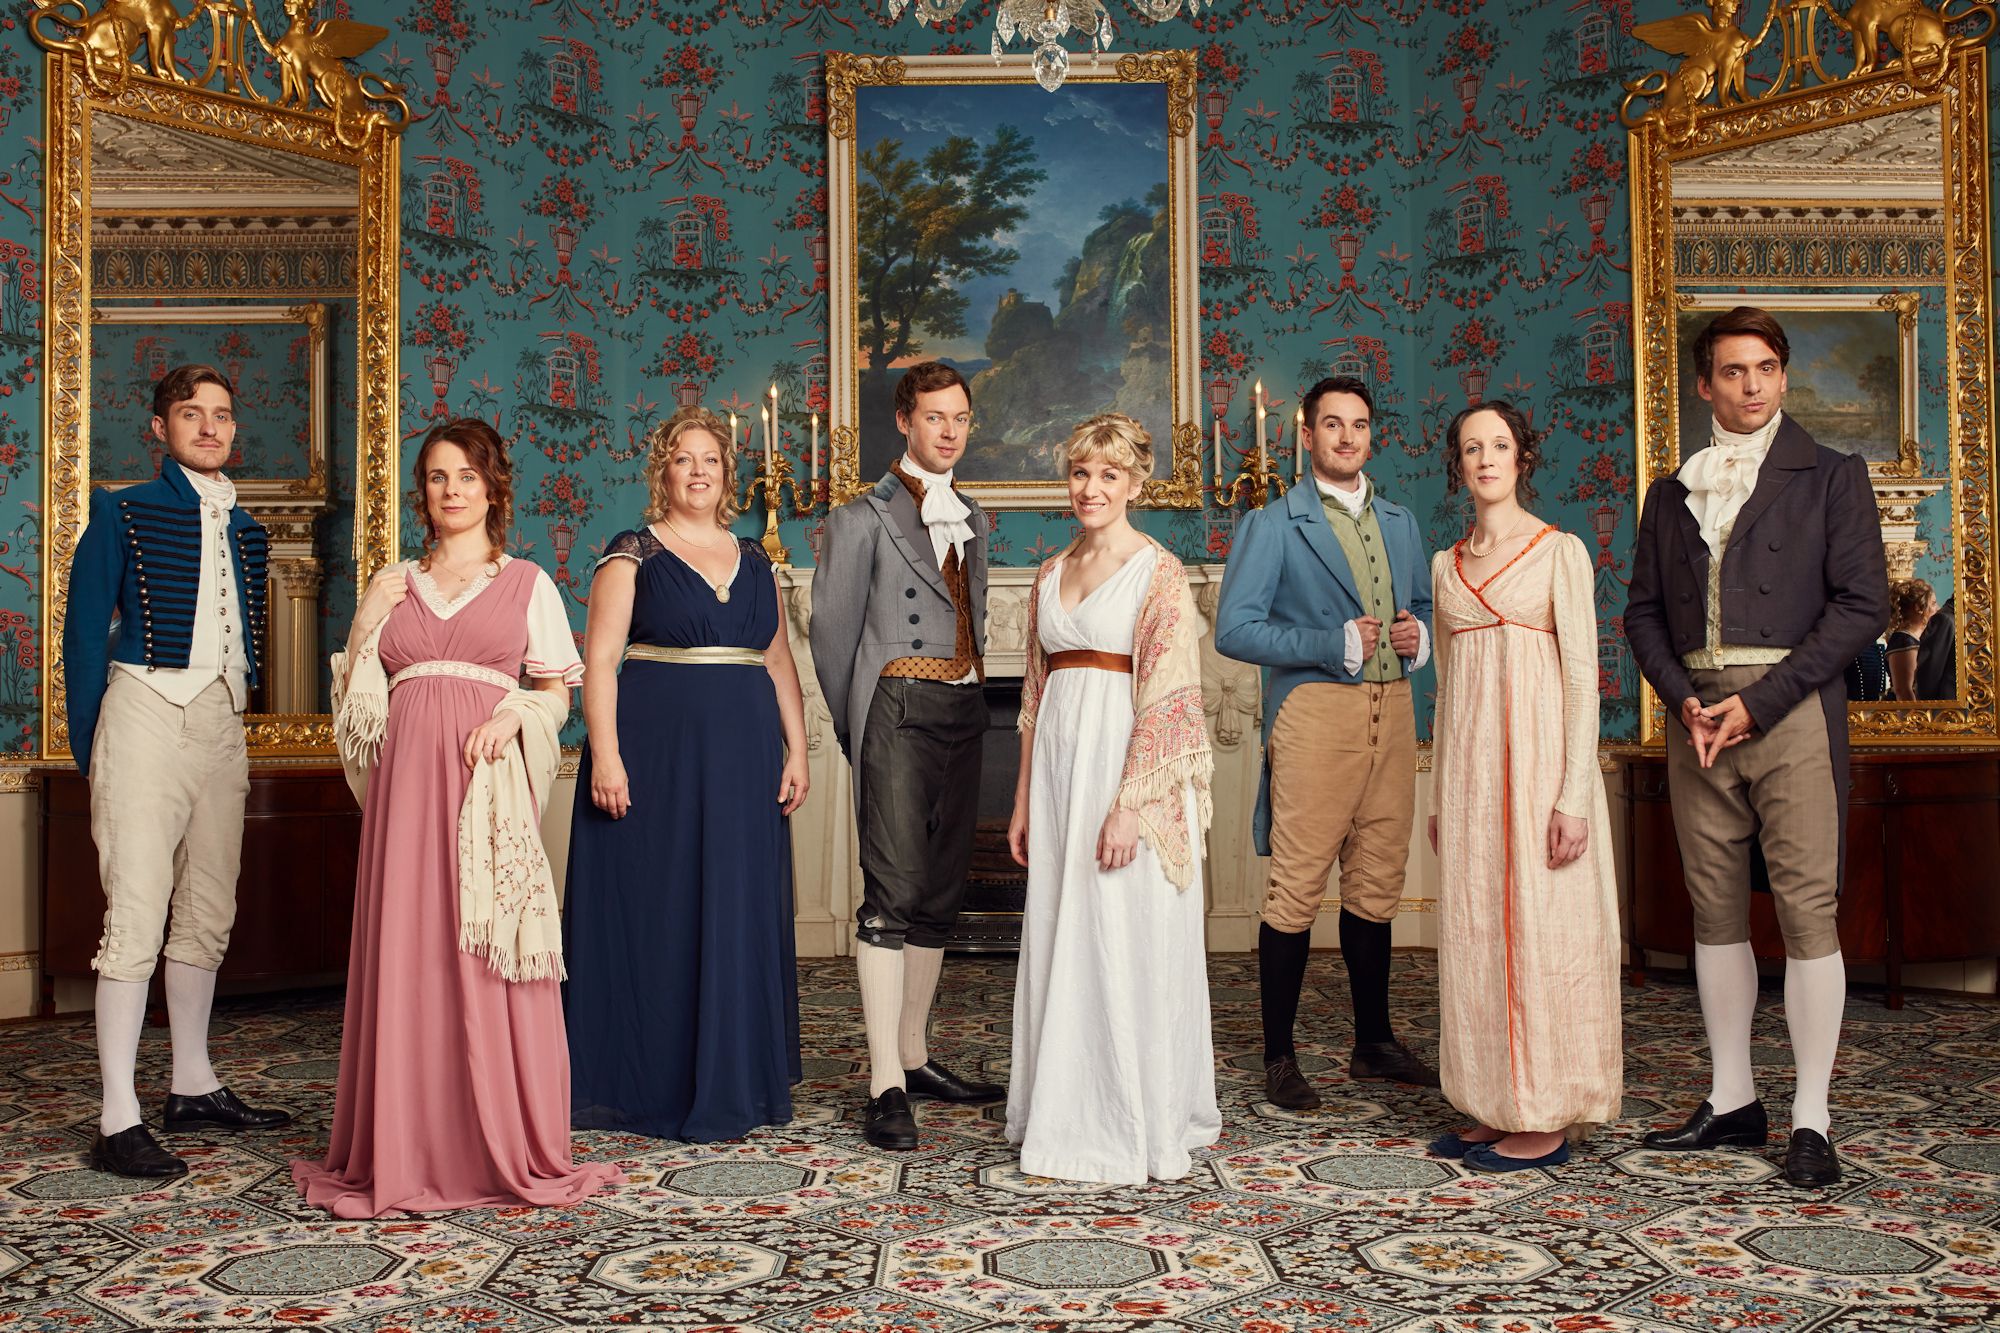 Eight performers in regency costumes line up in front of a painting in a large manor house.